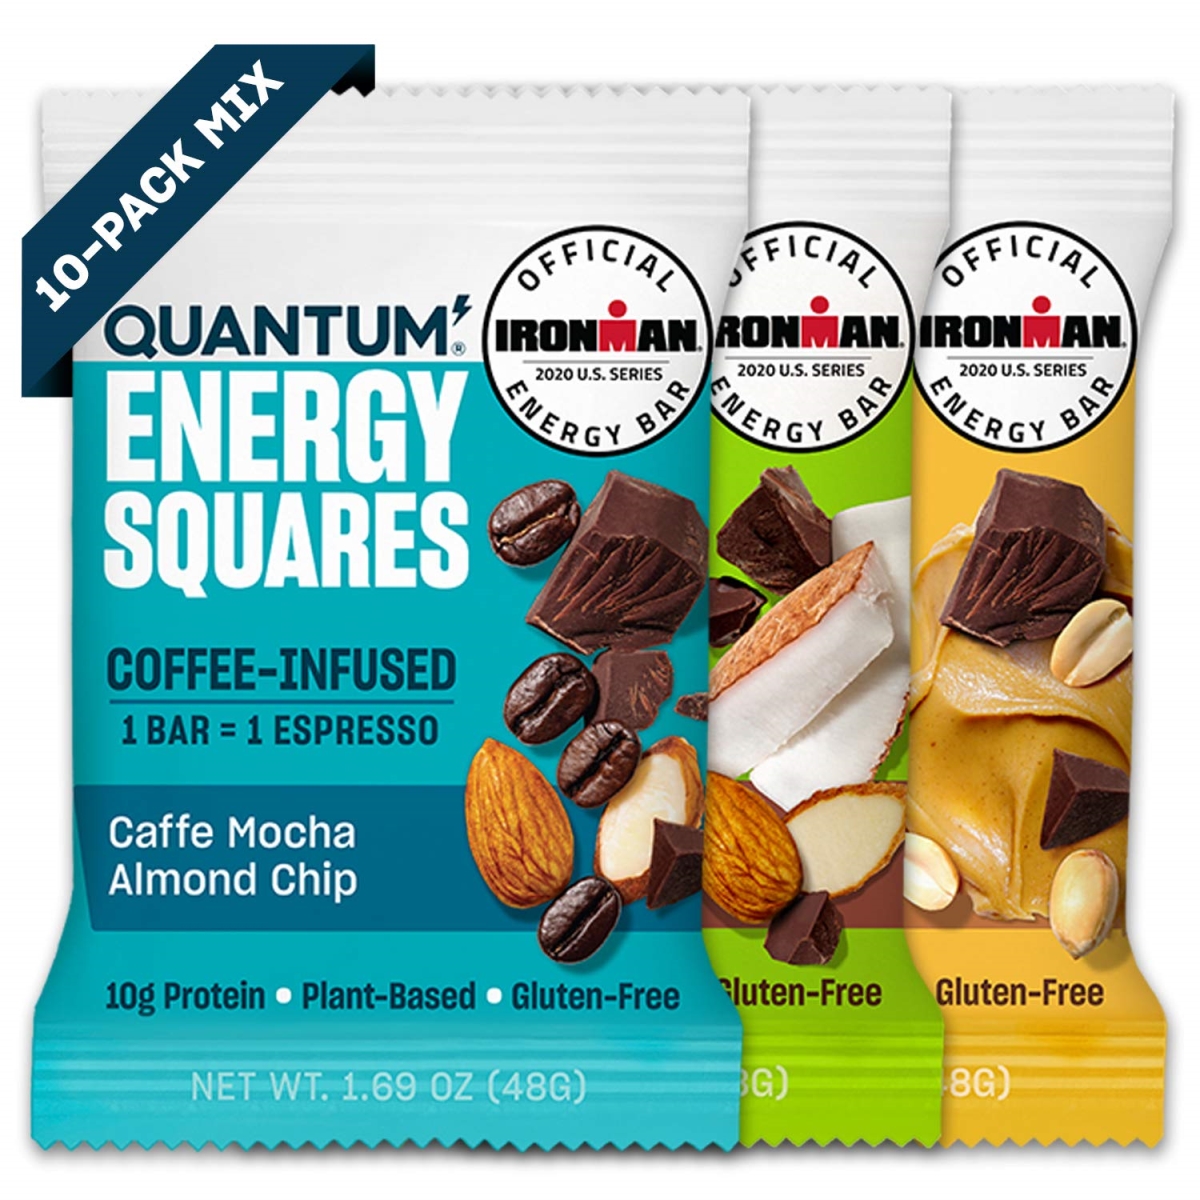 Picture of Quantum Energy Squares 2487817 1.69 oz Almond Chip Coffee Energy Coconut Bars